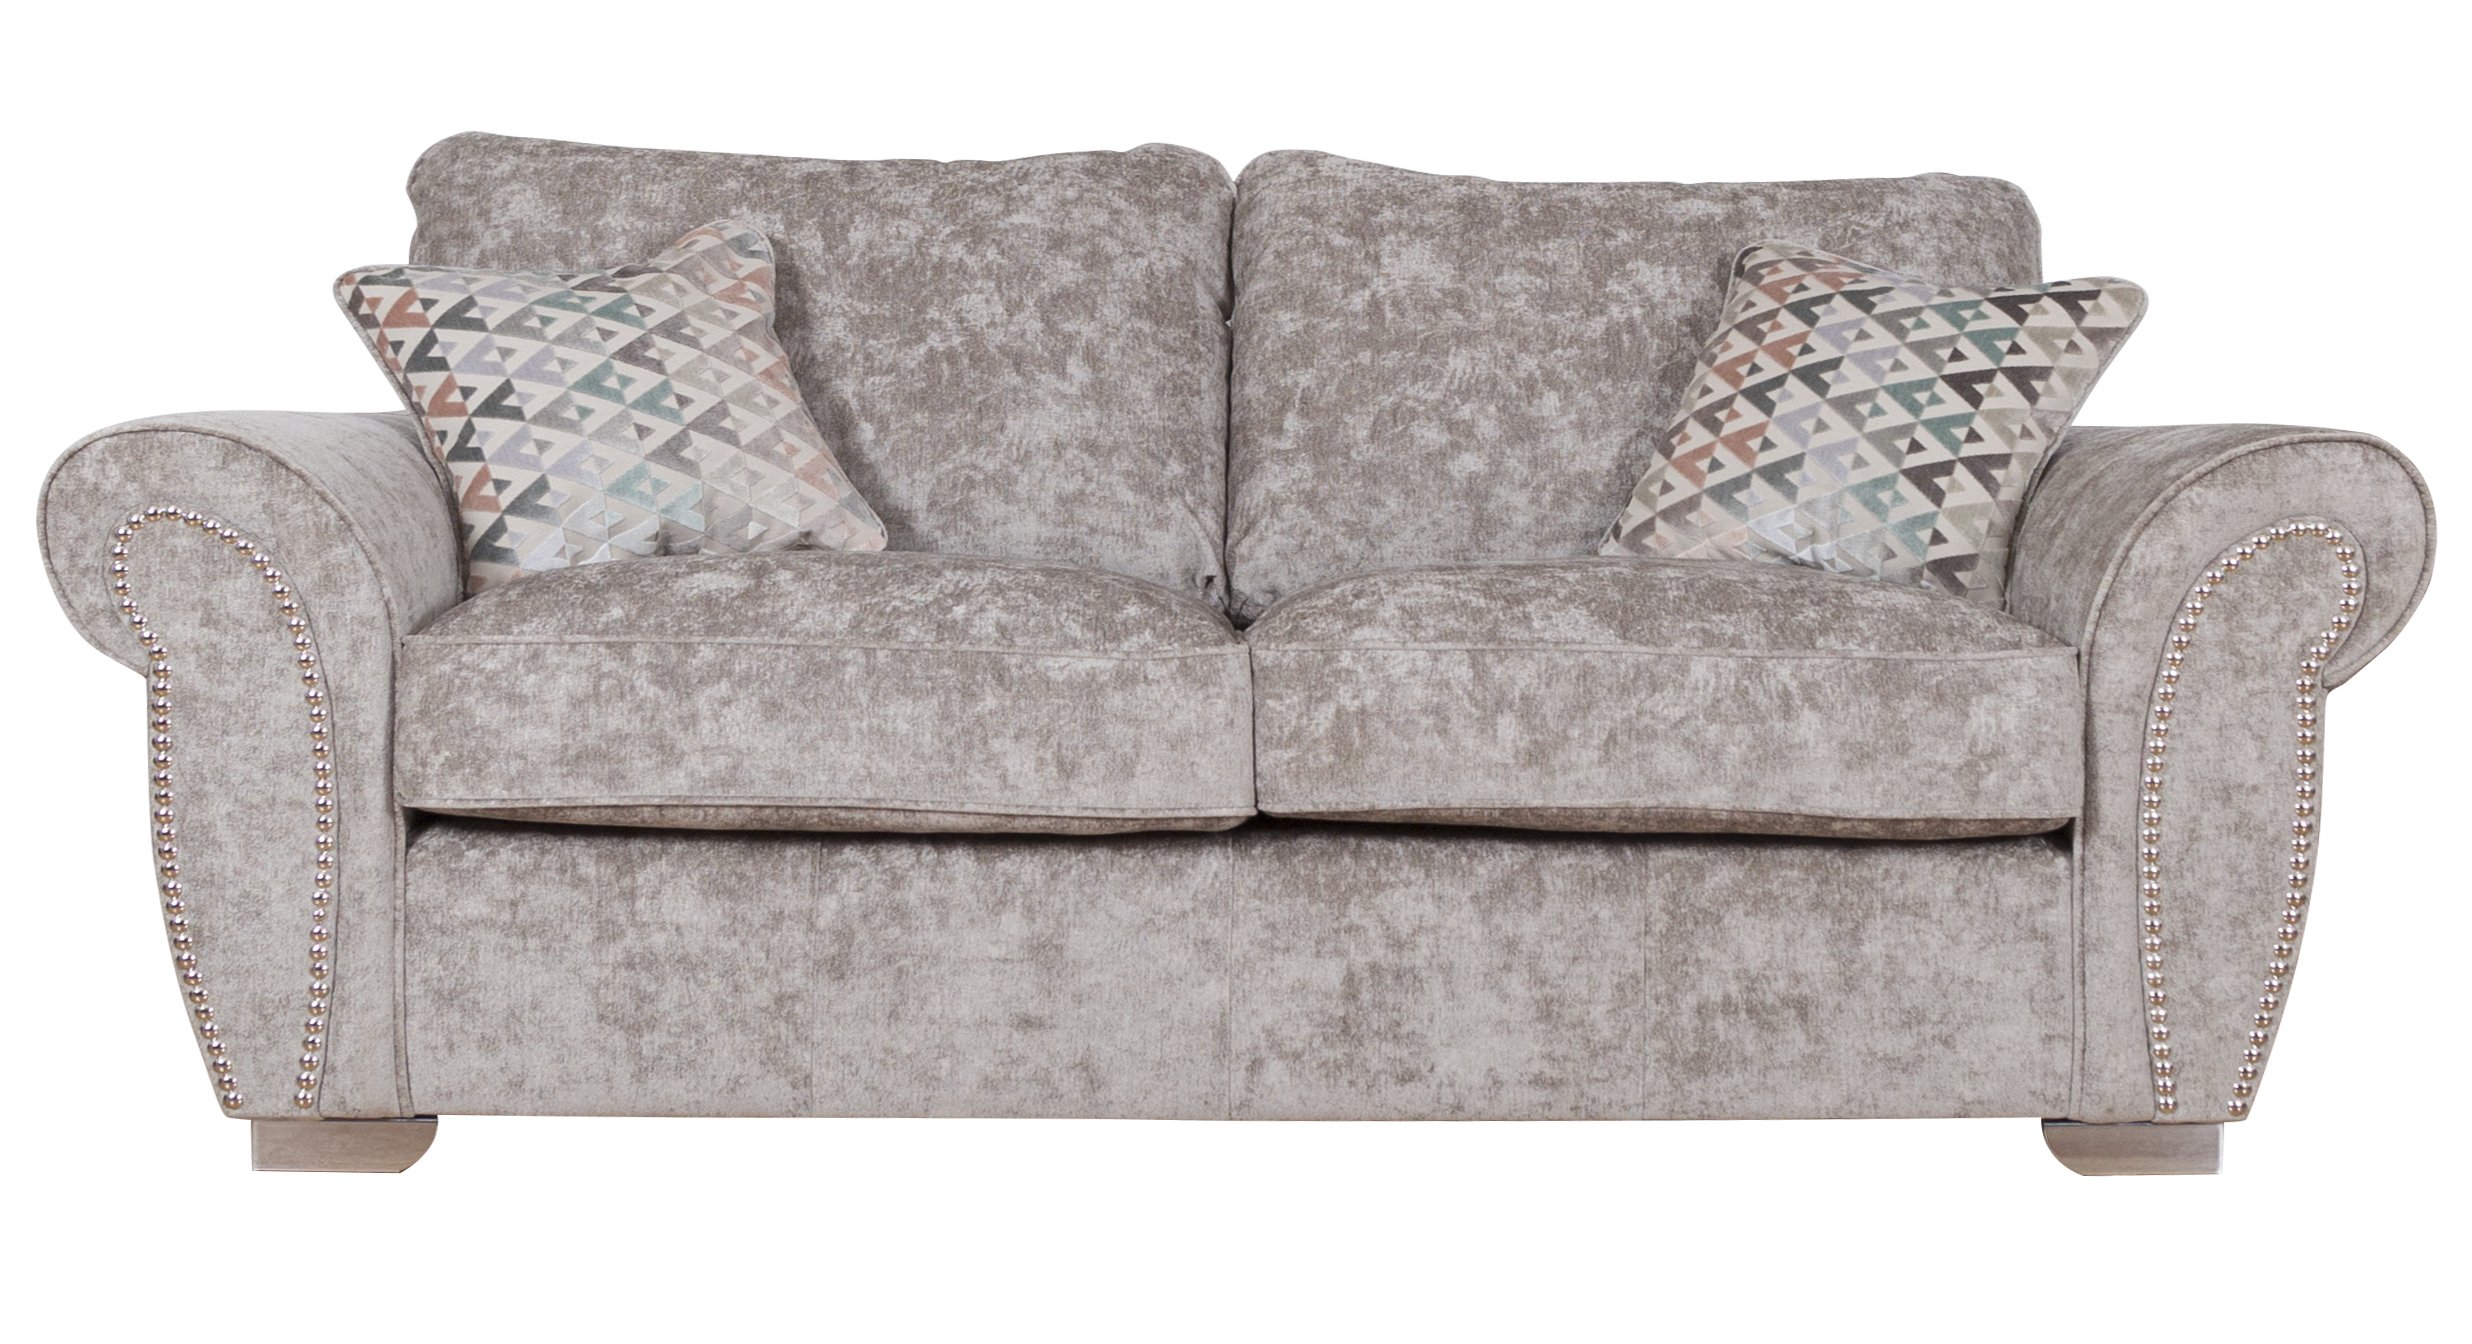 Flair - 3 Seater sofa - Front.jpg